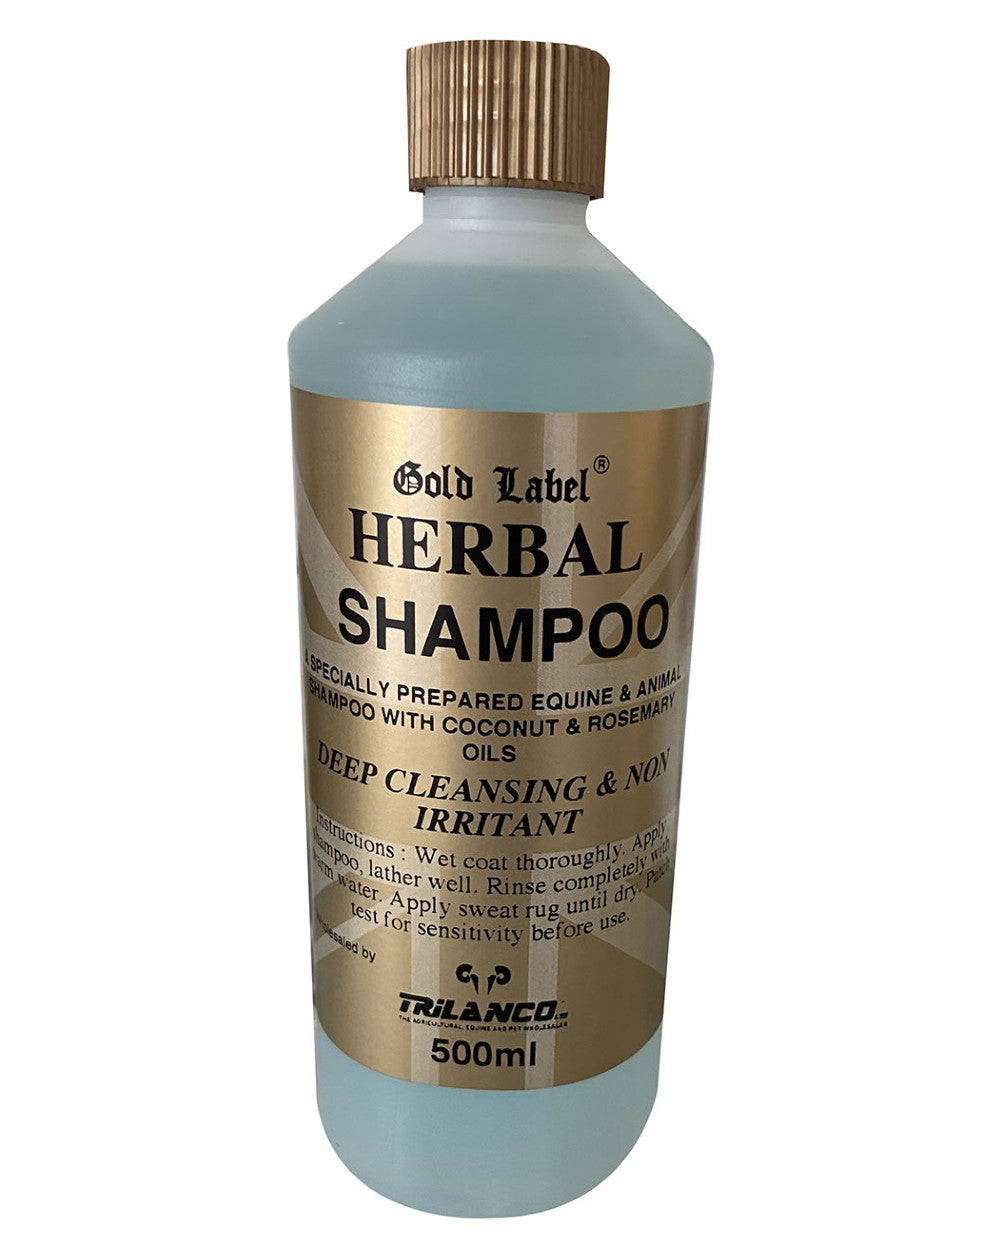 Gold Label Herbal Shampoo On A White Background